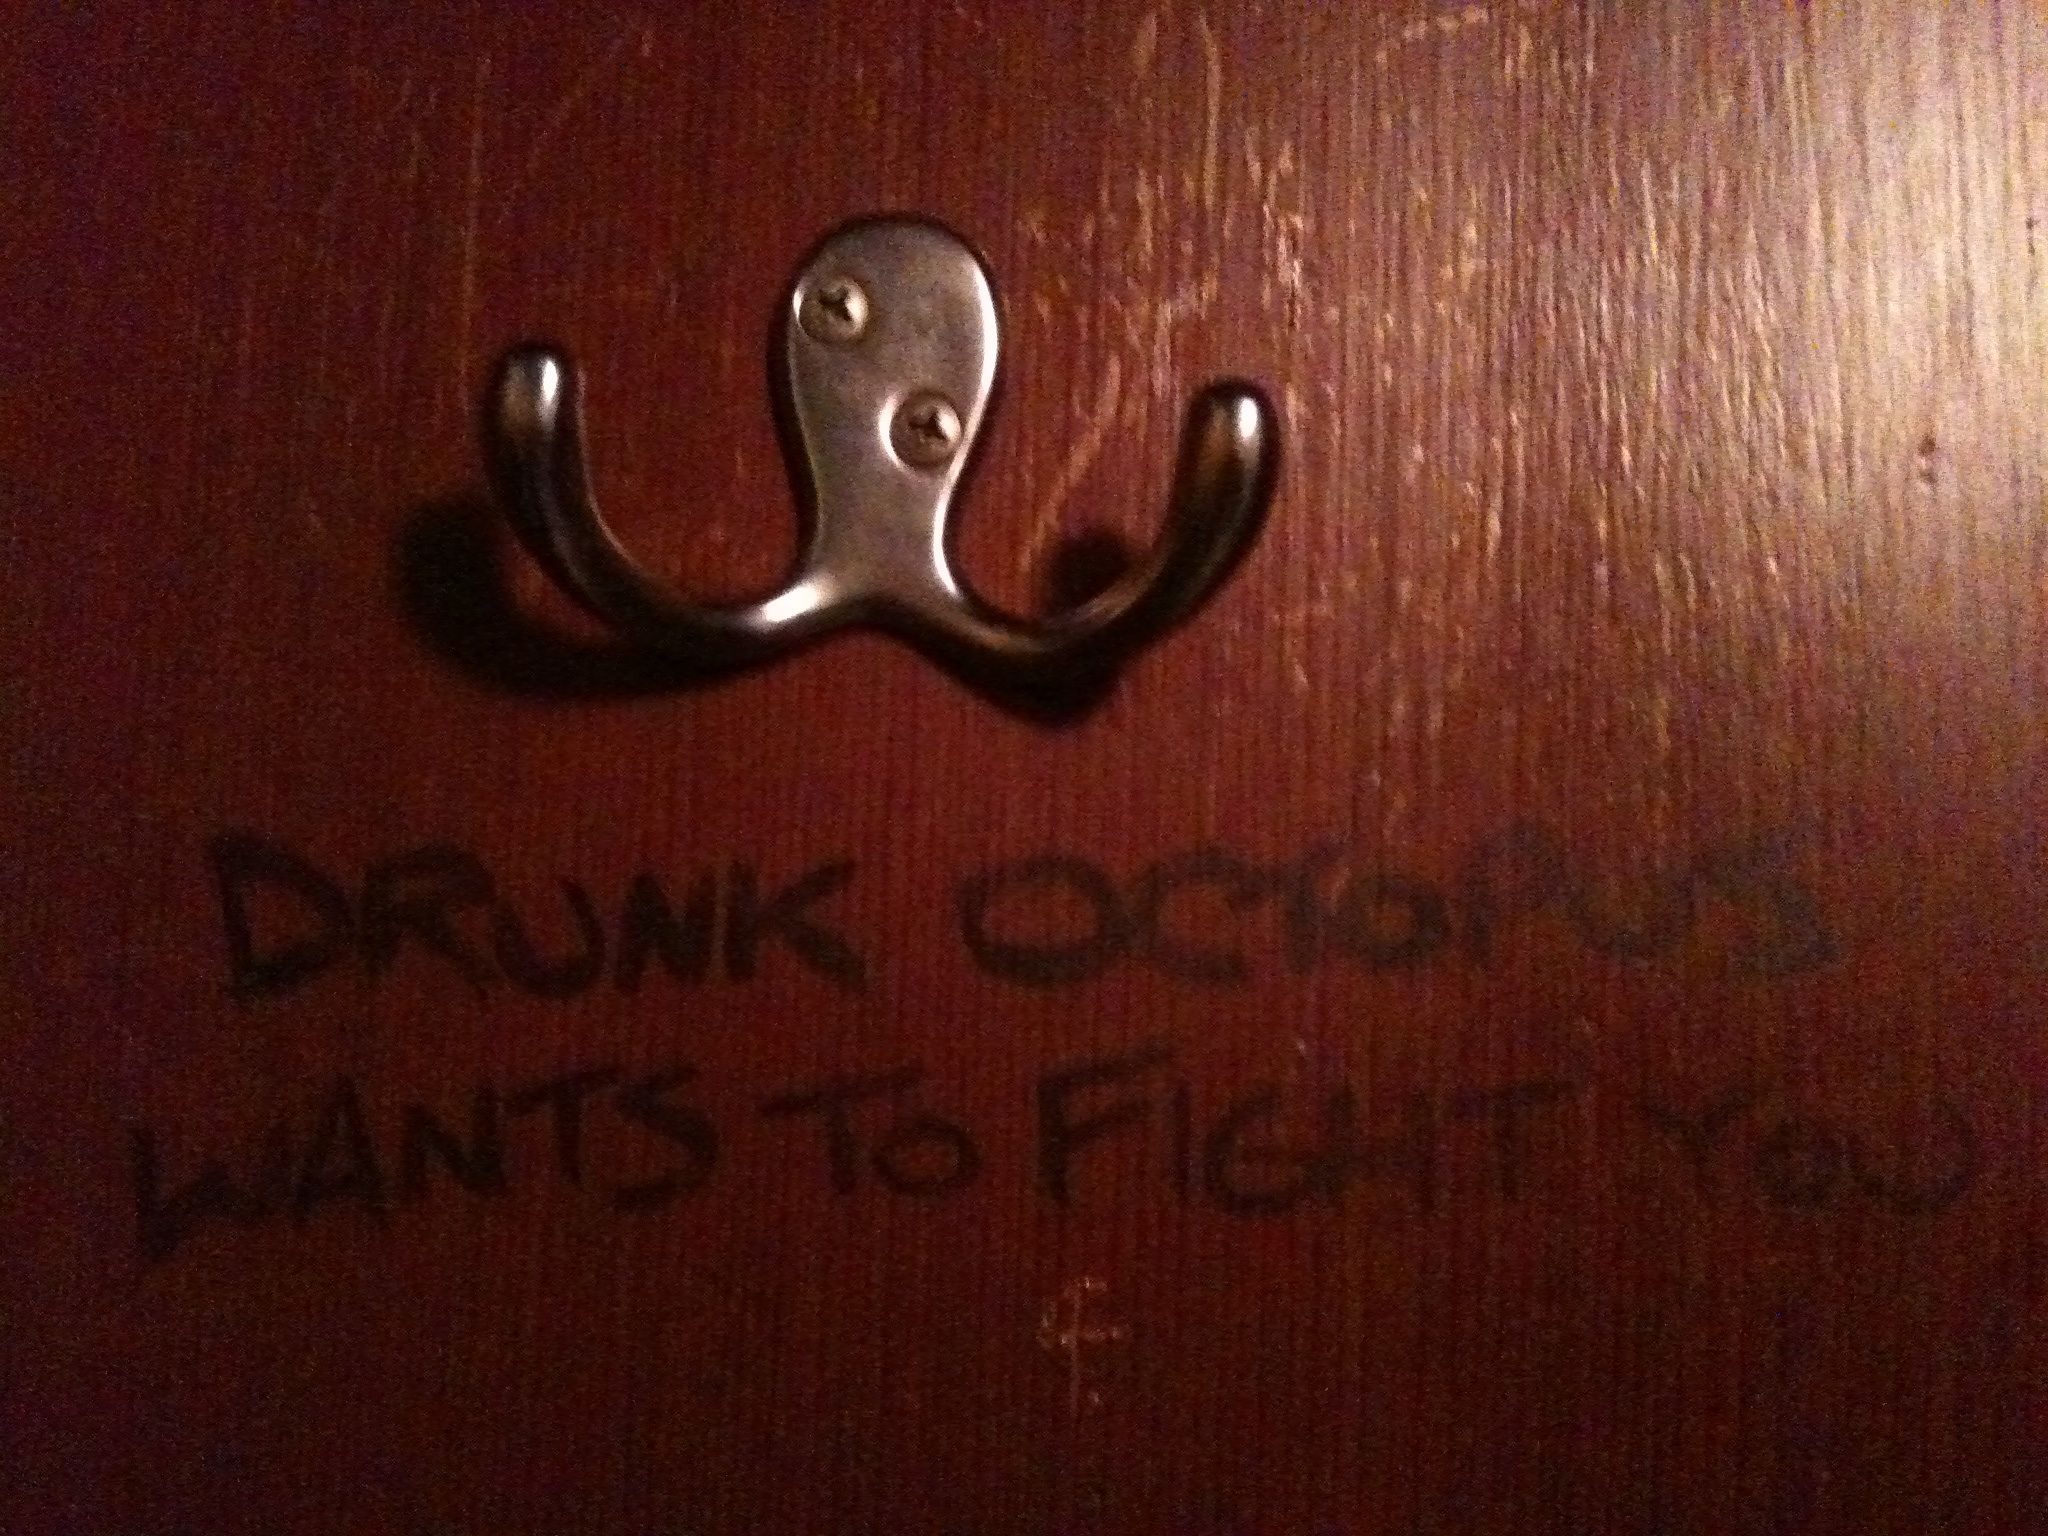 This coat hook looks like a drunk octopus